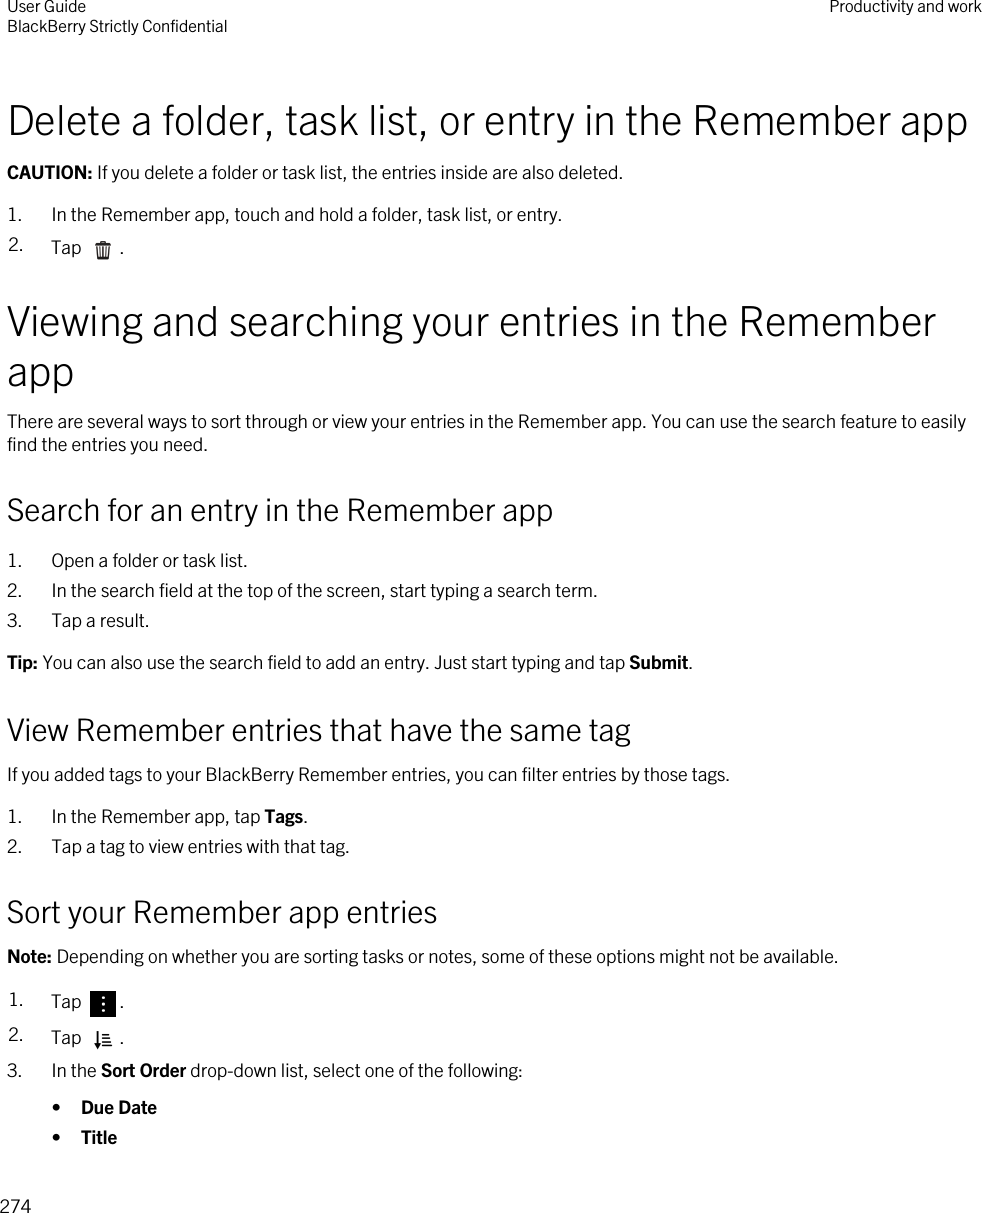 Delete a folder, task list, or entry in the Remember appCAUTION: If you delete a folder or task list, the entries inside are also deleted.1. In the Remember app, touch and hold a folder, task list, or entry.2. Tap  .Viewing and searching your entries in the Remember appThere are several ways to sort through or view your entries in the Remember app. You can use the search feature to easily find the entries you need.Search for an entry in the Remember app1. Open a folder or task list.2. In the search field at the top of the screen, start typing a search term.3. Tap a result.Tip: You can also use the search field to add an entry. Just start typing and tap Submit.View Remember entries that have the same tagIf you added tags to your BlackBerry Remember entries, you can filter entries by those tags.1. In the Remember app, tap Tags.2. Tap a tag to view entries with that tag.Sort your Remember app entriesNote: Depending on whether you are sorting tasks or notes, some of these options might not be available.1. Tap  . 2. Tap  .3. In the Sort Order drop-down list, select one of the following:•Due Date•TitleUser GuideBlackBerry Strictly Confidential Productivity and work274